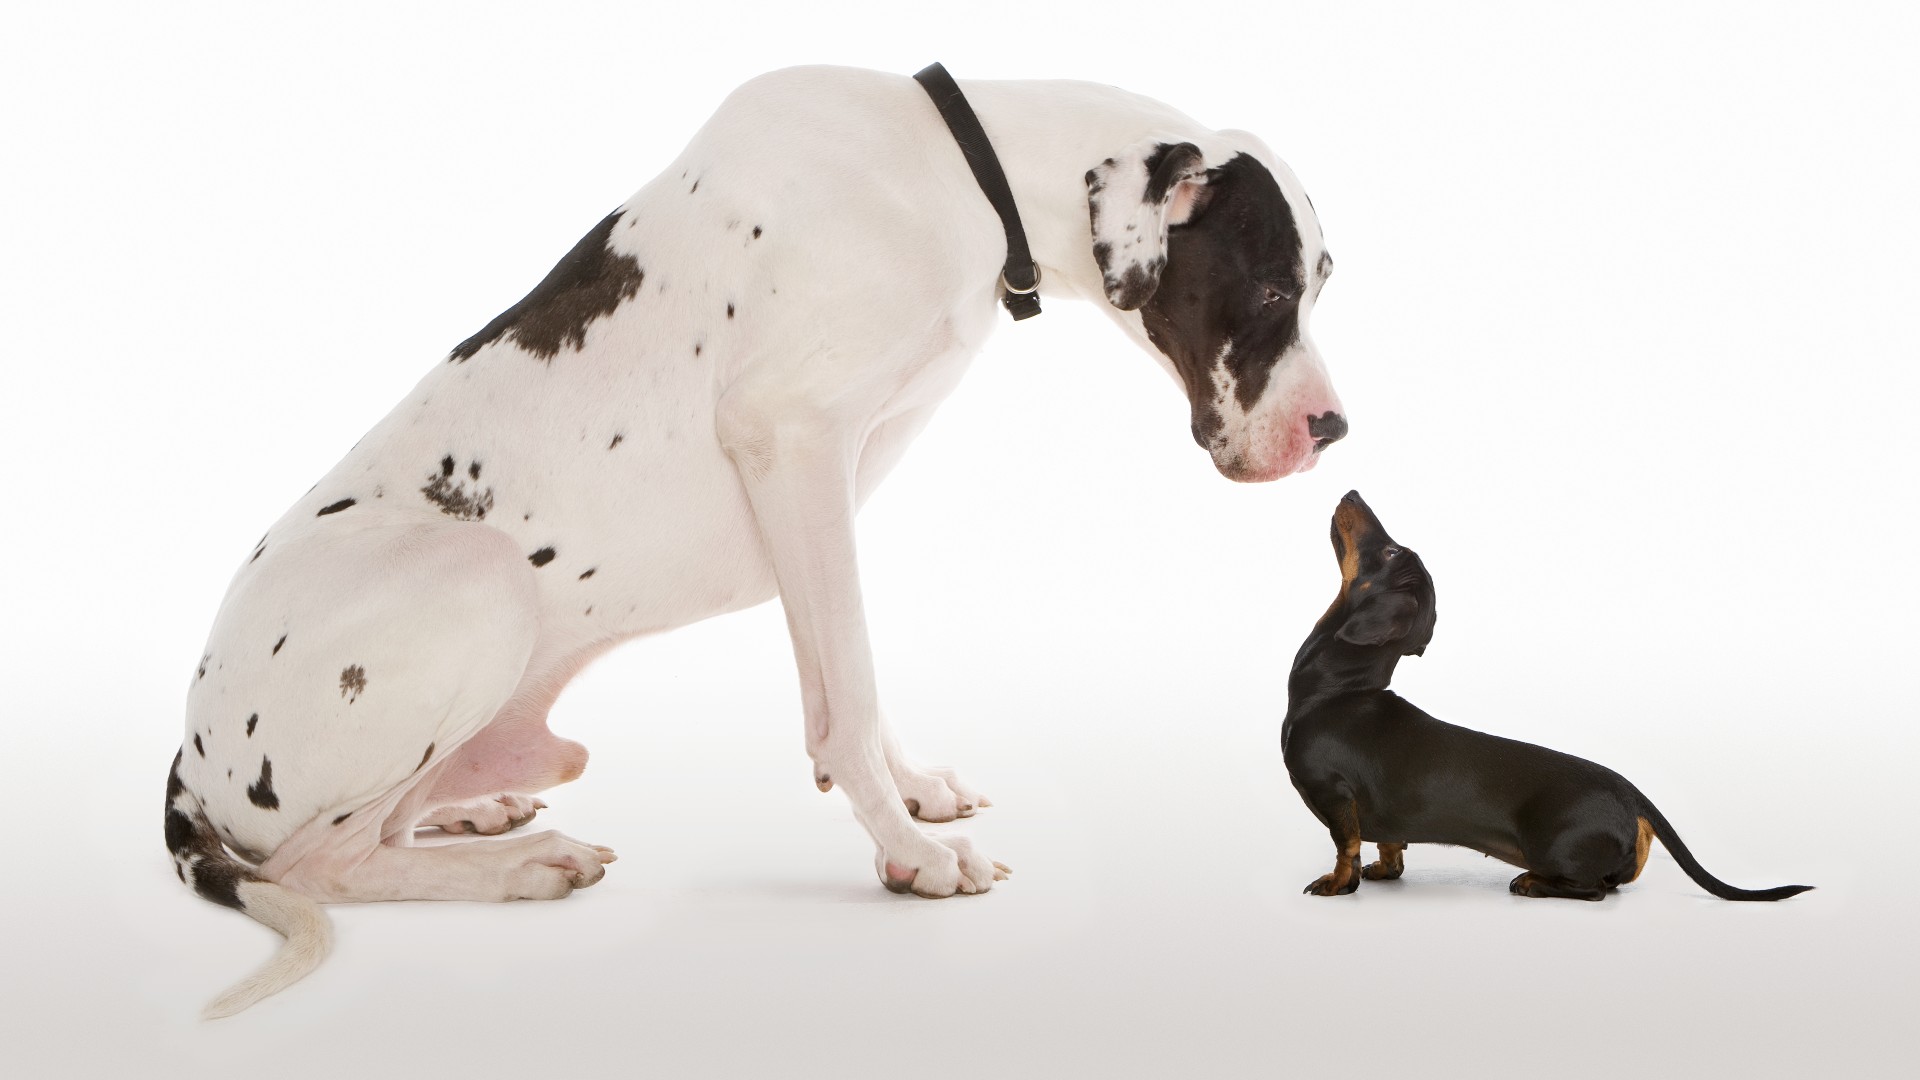 Harlequin Great Dane and Miniature Dachshund sitting face to face on a white background.